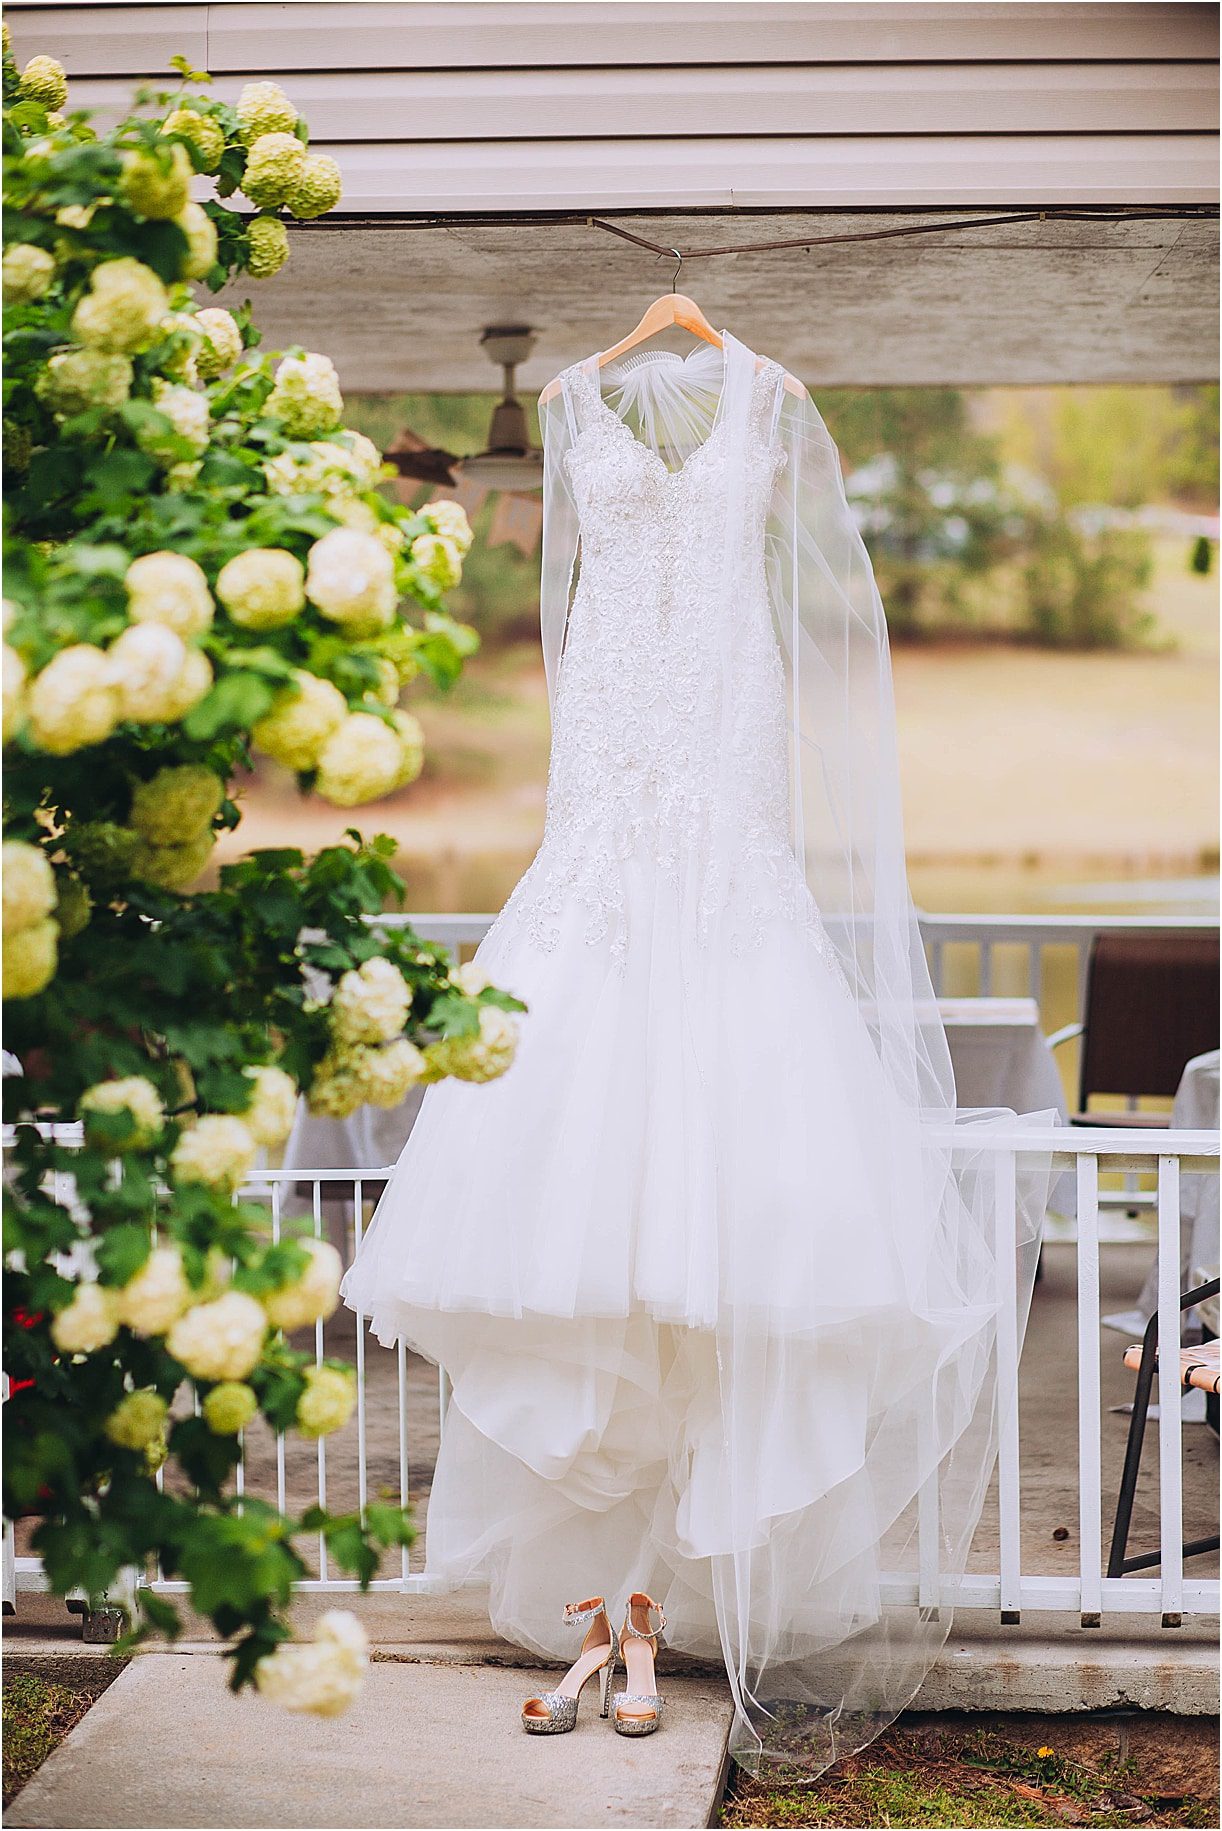 Intimate Ceremony During Covid-19 | Hill City Bride Virginia Weddings Gown Dress